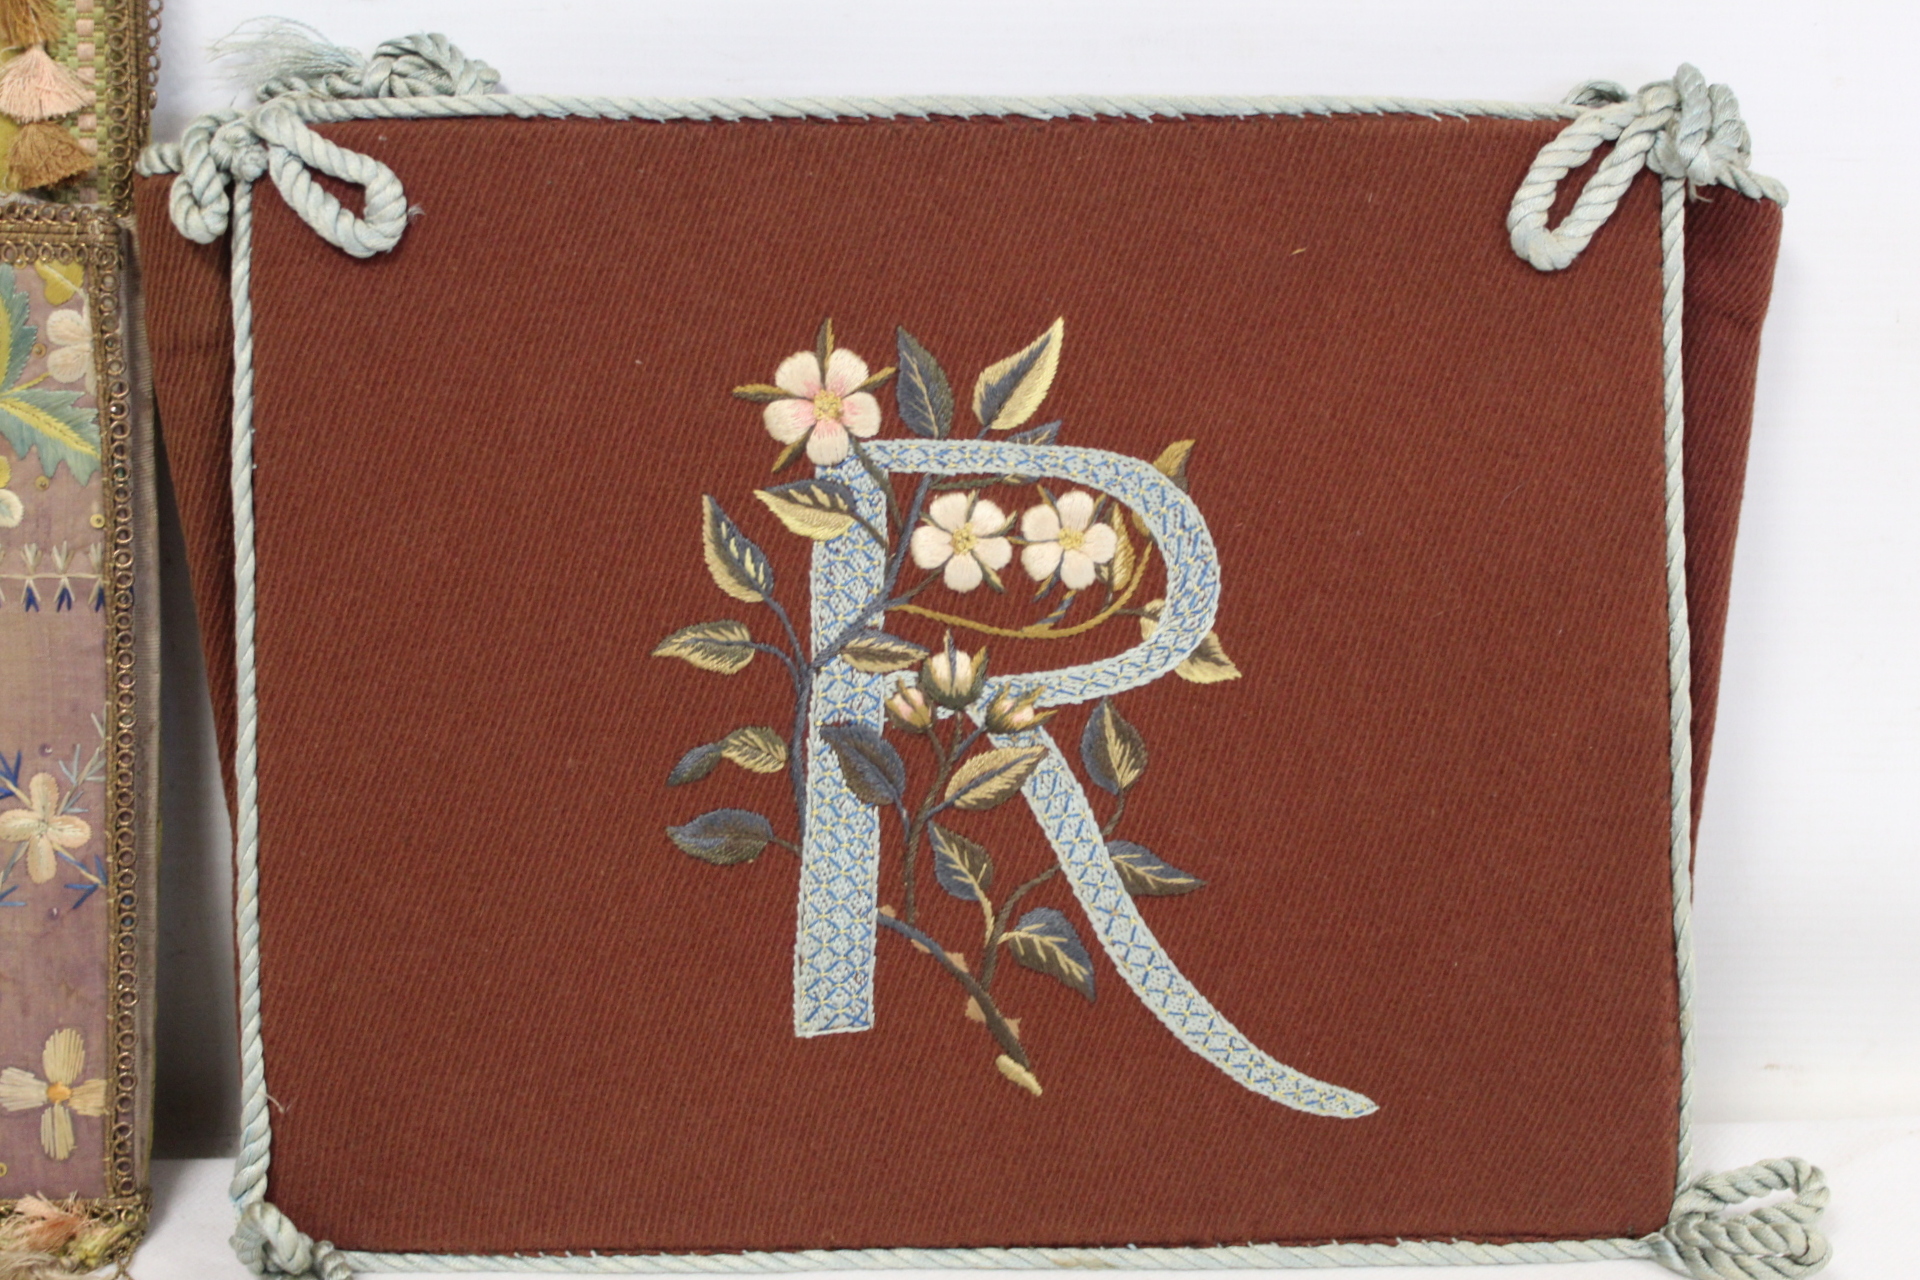 Georgian silk and damask wall pocket of rectangular form with arched top, floral and foliate - Image 3 of 4